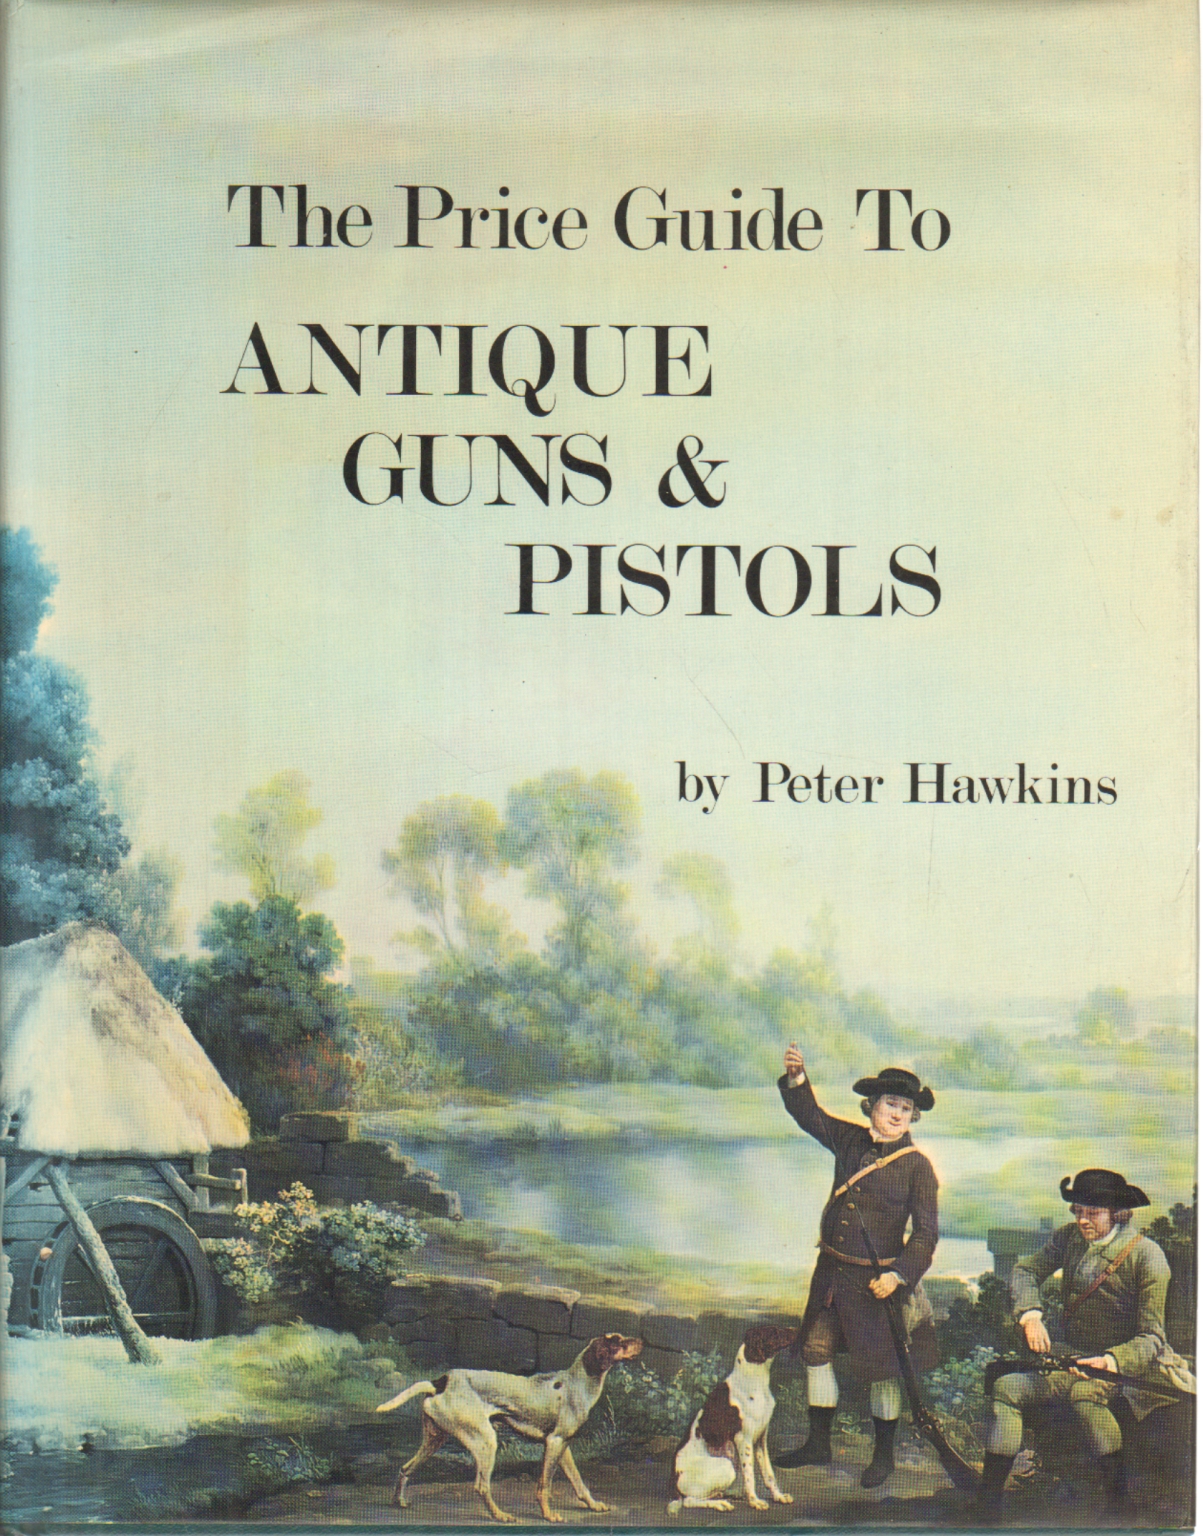 The Price Guide to Antique Guns & Pistols, Peter Hawkins